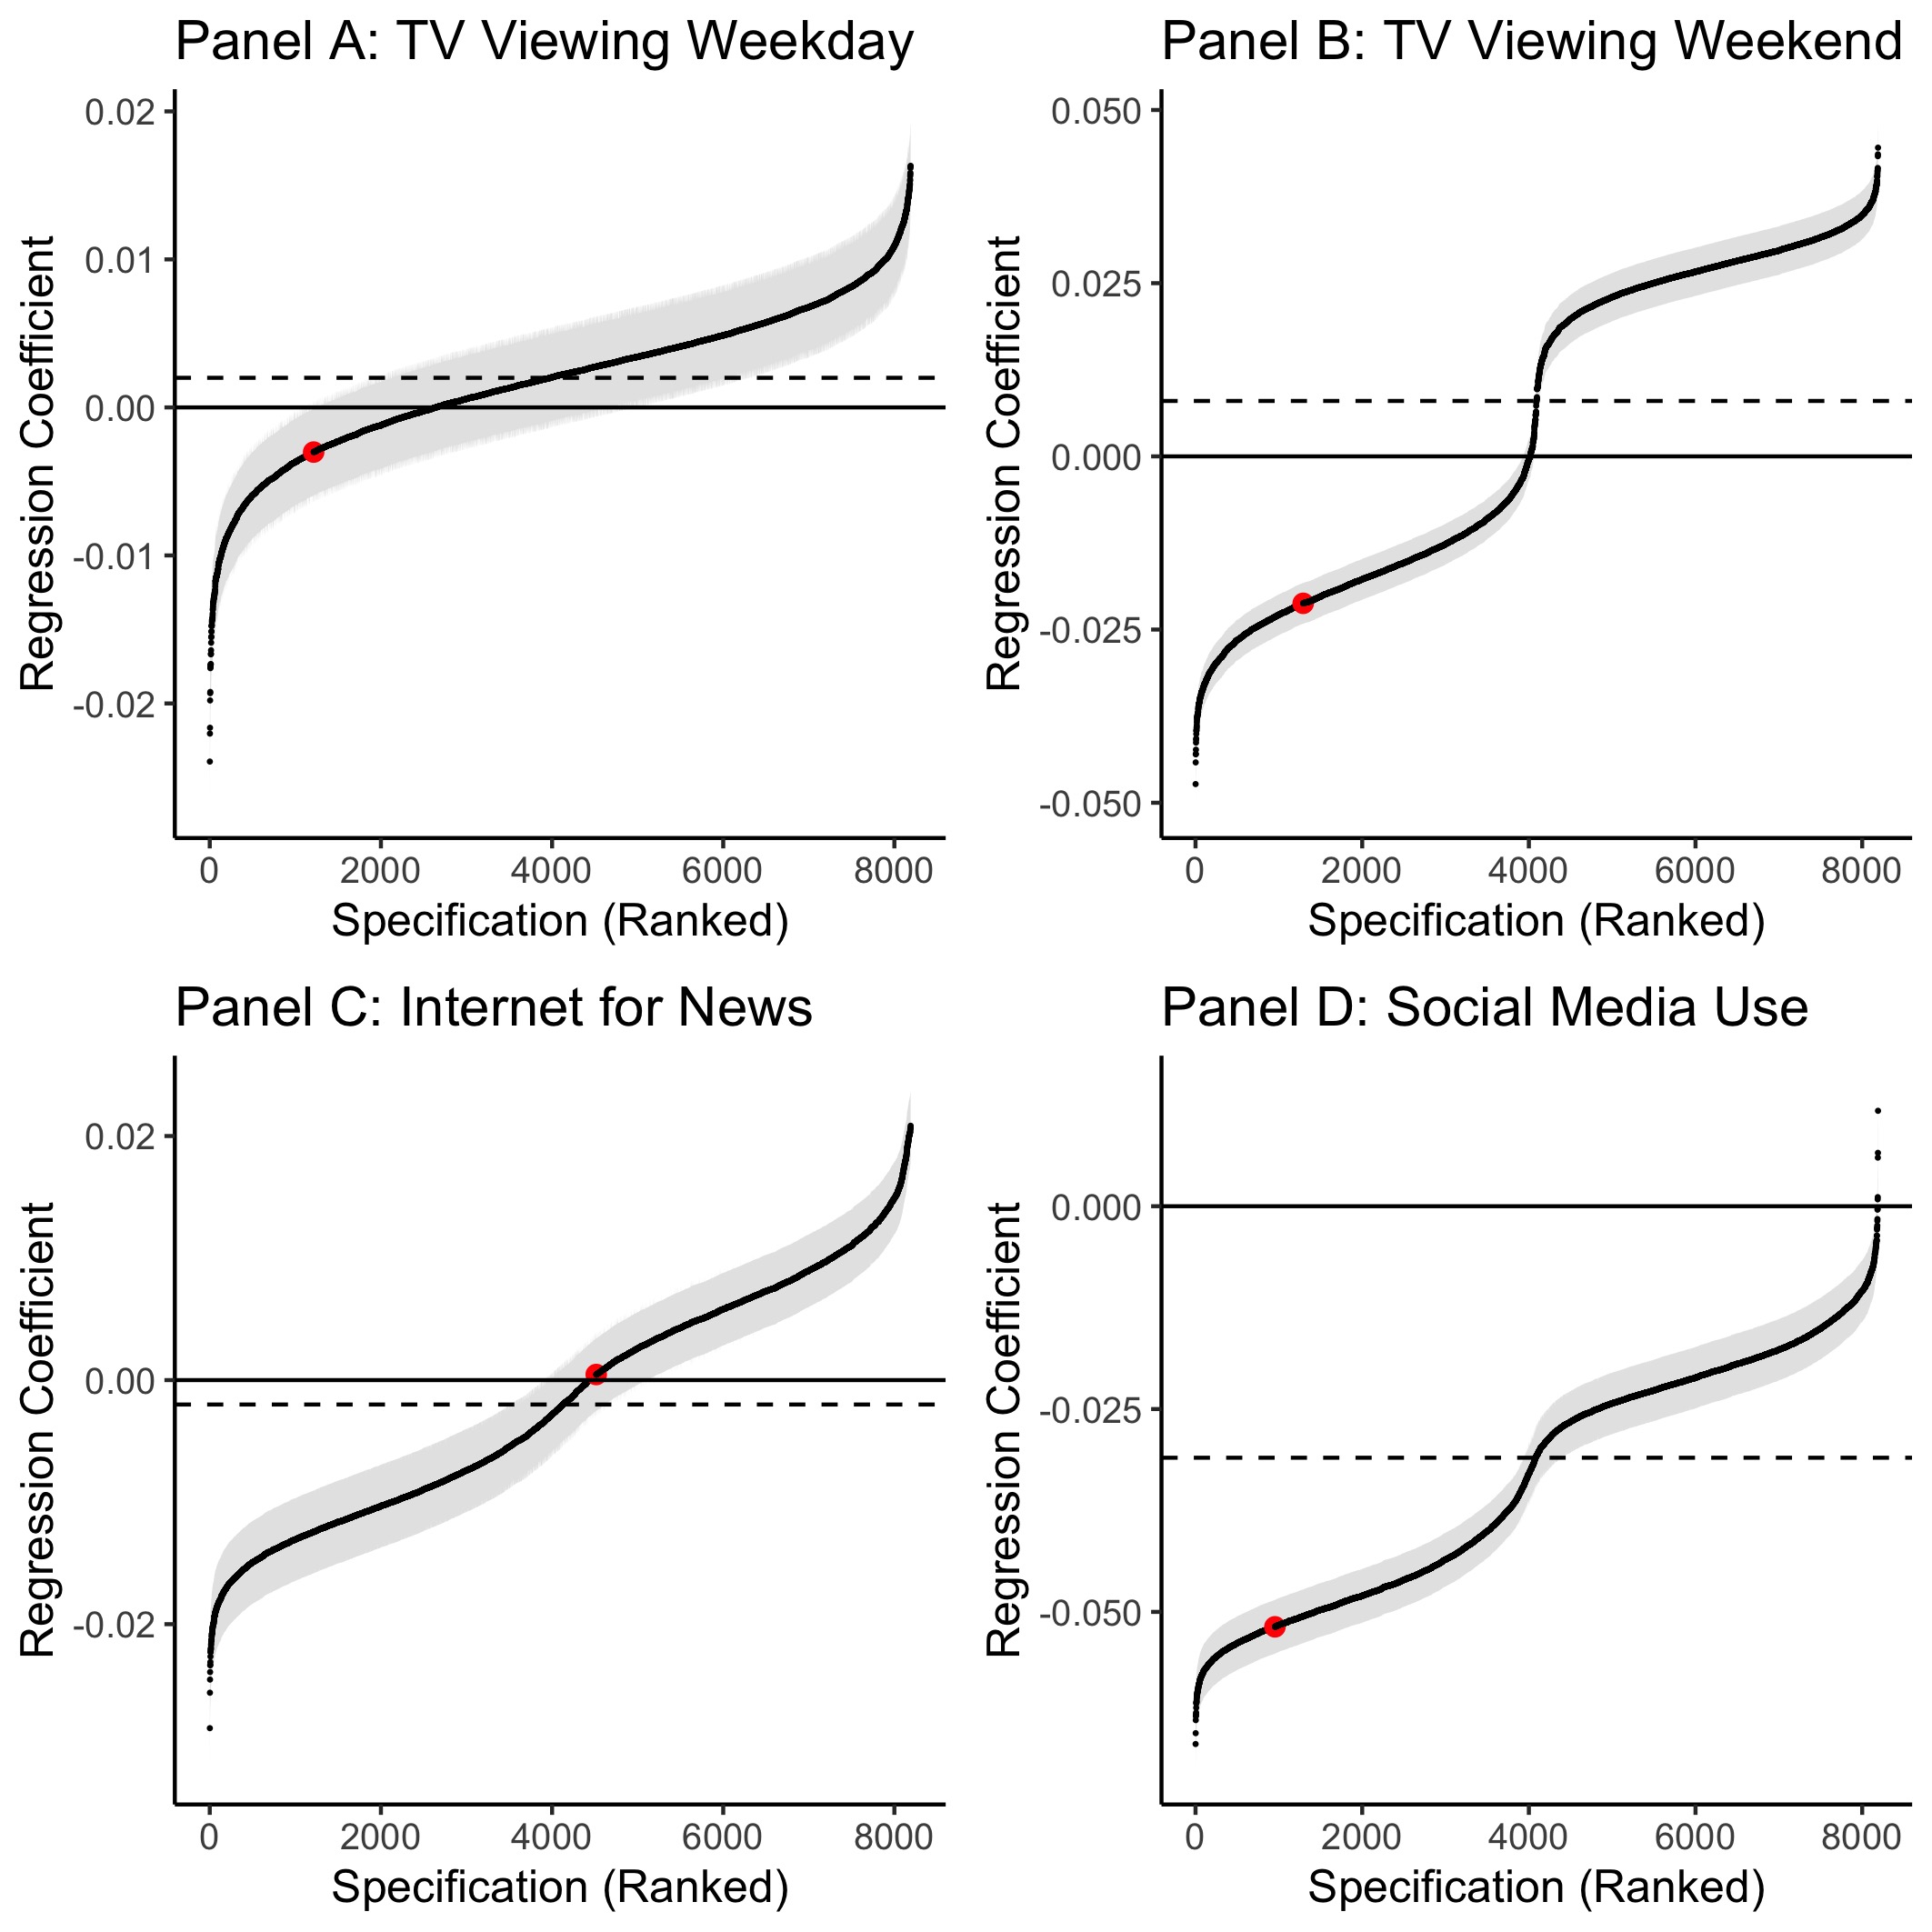 Each panel of this figure illustrates the range of possible results found using a SCA regressing a specific technology use variable onto well-being in the MTF dataset: Panel A examines TV viewing on a weekday, Panel B examines TV viewing on a weekend, Panel C examines using the internet to get news and Panel D examines social media use. The error bars represent the standard error and the dotted line shows the median standardised regression coefficient. I highlight in red the specifications chosen by Twenge and colleagues (2017) for their analysis of the MTF dataset. The researchers used a novel combination of measures from both well-being and self-esteem scales to create a well-being scale in their study, see also Figure 2.1. They correlated this measure with technology use measures (TV viewing, using the internet for news and social media use) and included either no controls or range of controls variables. We only show Twenge et al.’s results with no controls in this visualisation due to their chosen controls being difficult to reproduce computationally. We note that our results from implementing Twenge and colleague’s specification for TV viewing are not consonant with those reported in Twenge et al. (2017). For TV viewing on a weekday the specifications chosen in Twenge et al. (2017) were at the 15th percentile of effect sizes, for TV viewing on a weekday they were at the 16th percentile. For getting news over the internet, the chosen specifications were at the 55rd percentile and for social media use the chosen values were at the 12th percentile.